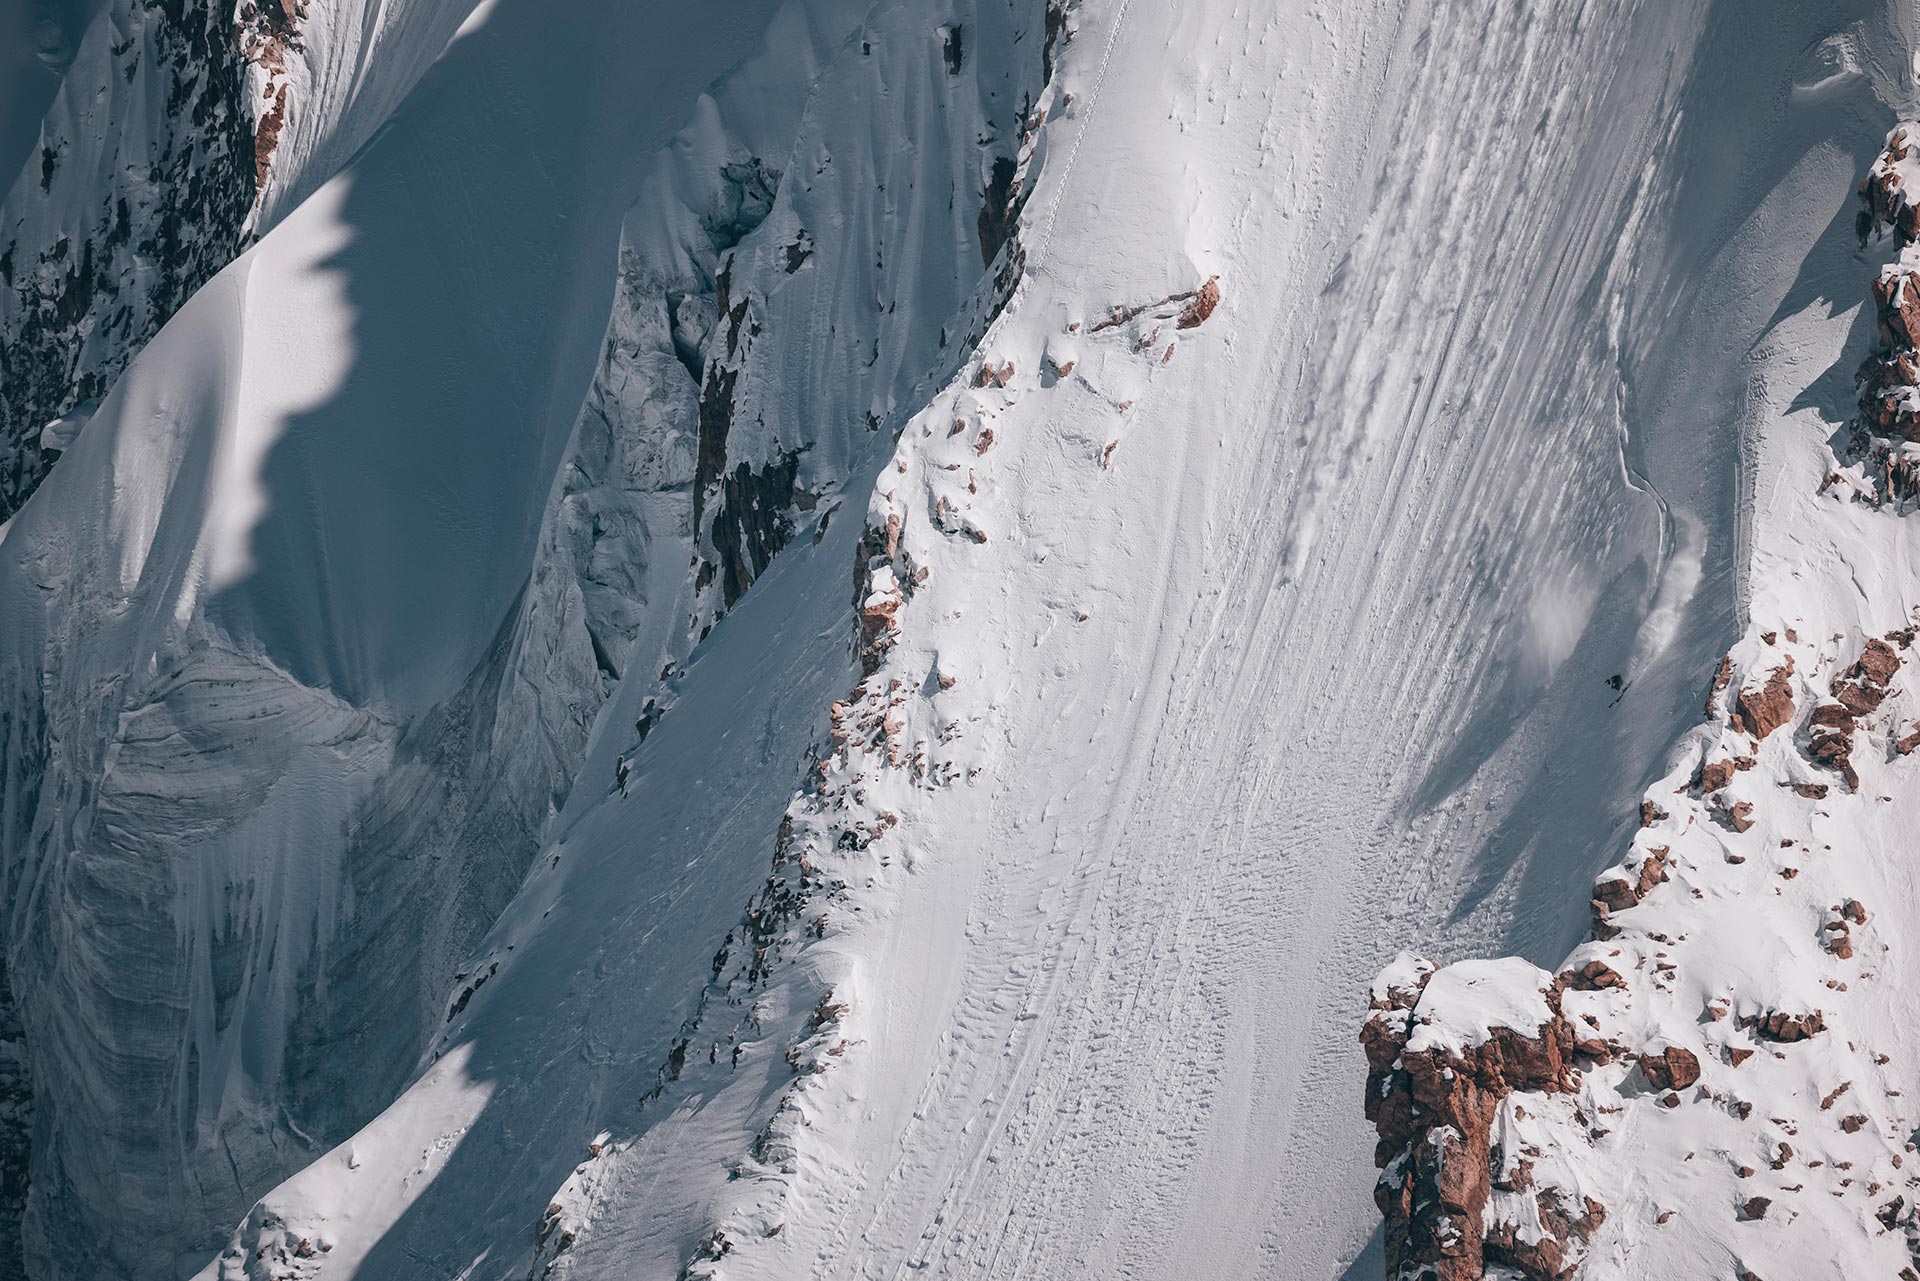 Jeremie Heitz skiing in Pakistan while filming La Liste: Everything or Nothing